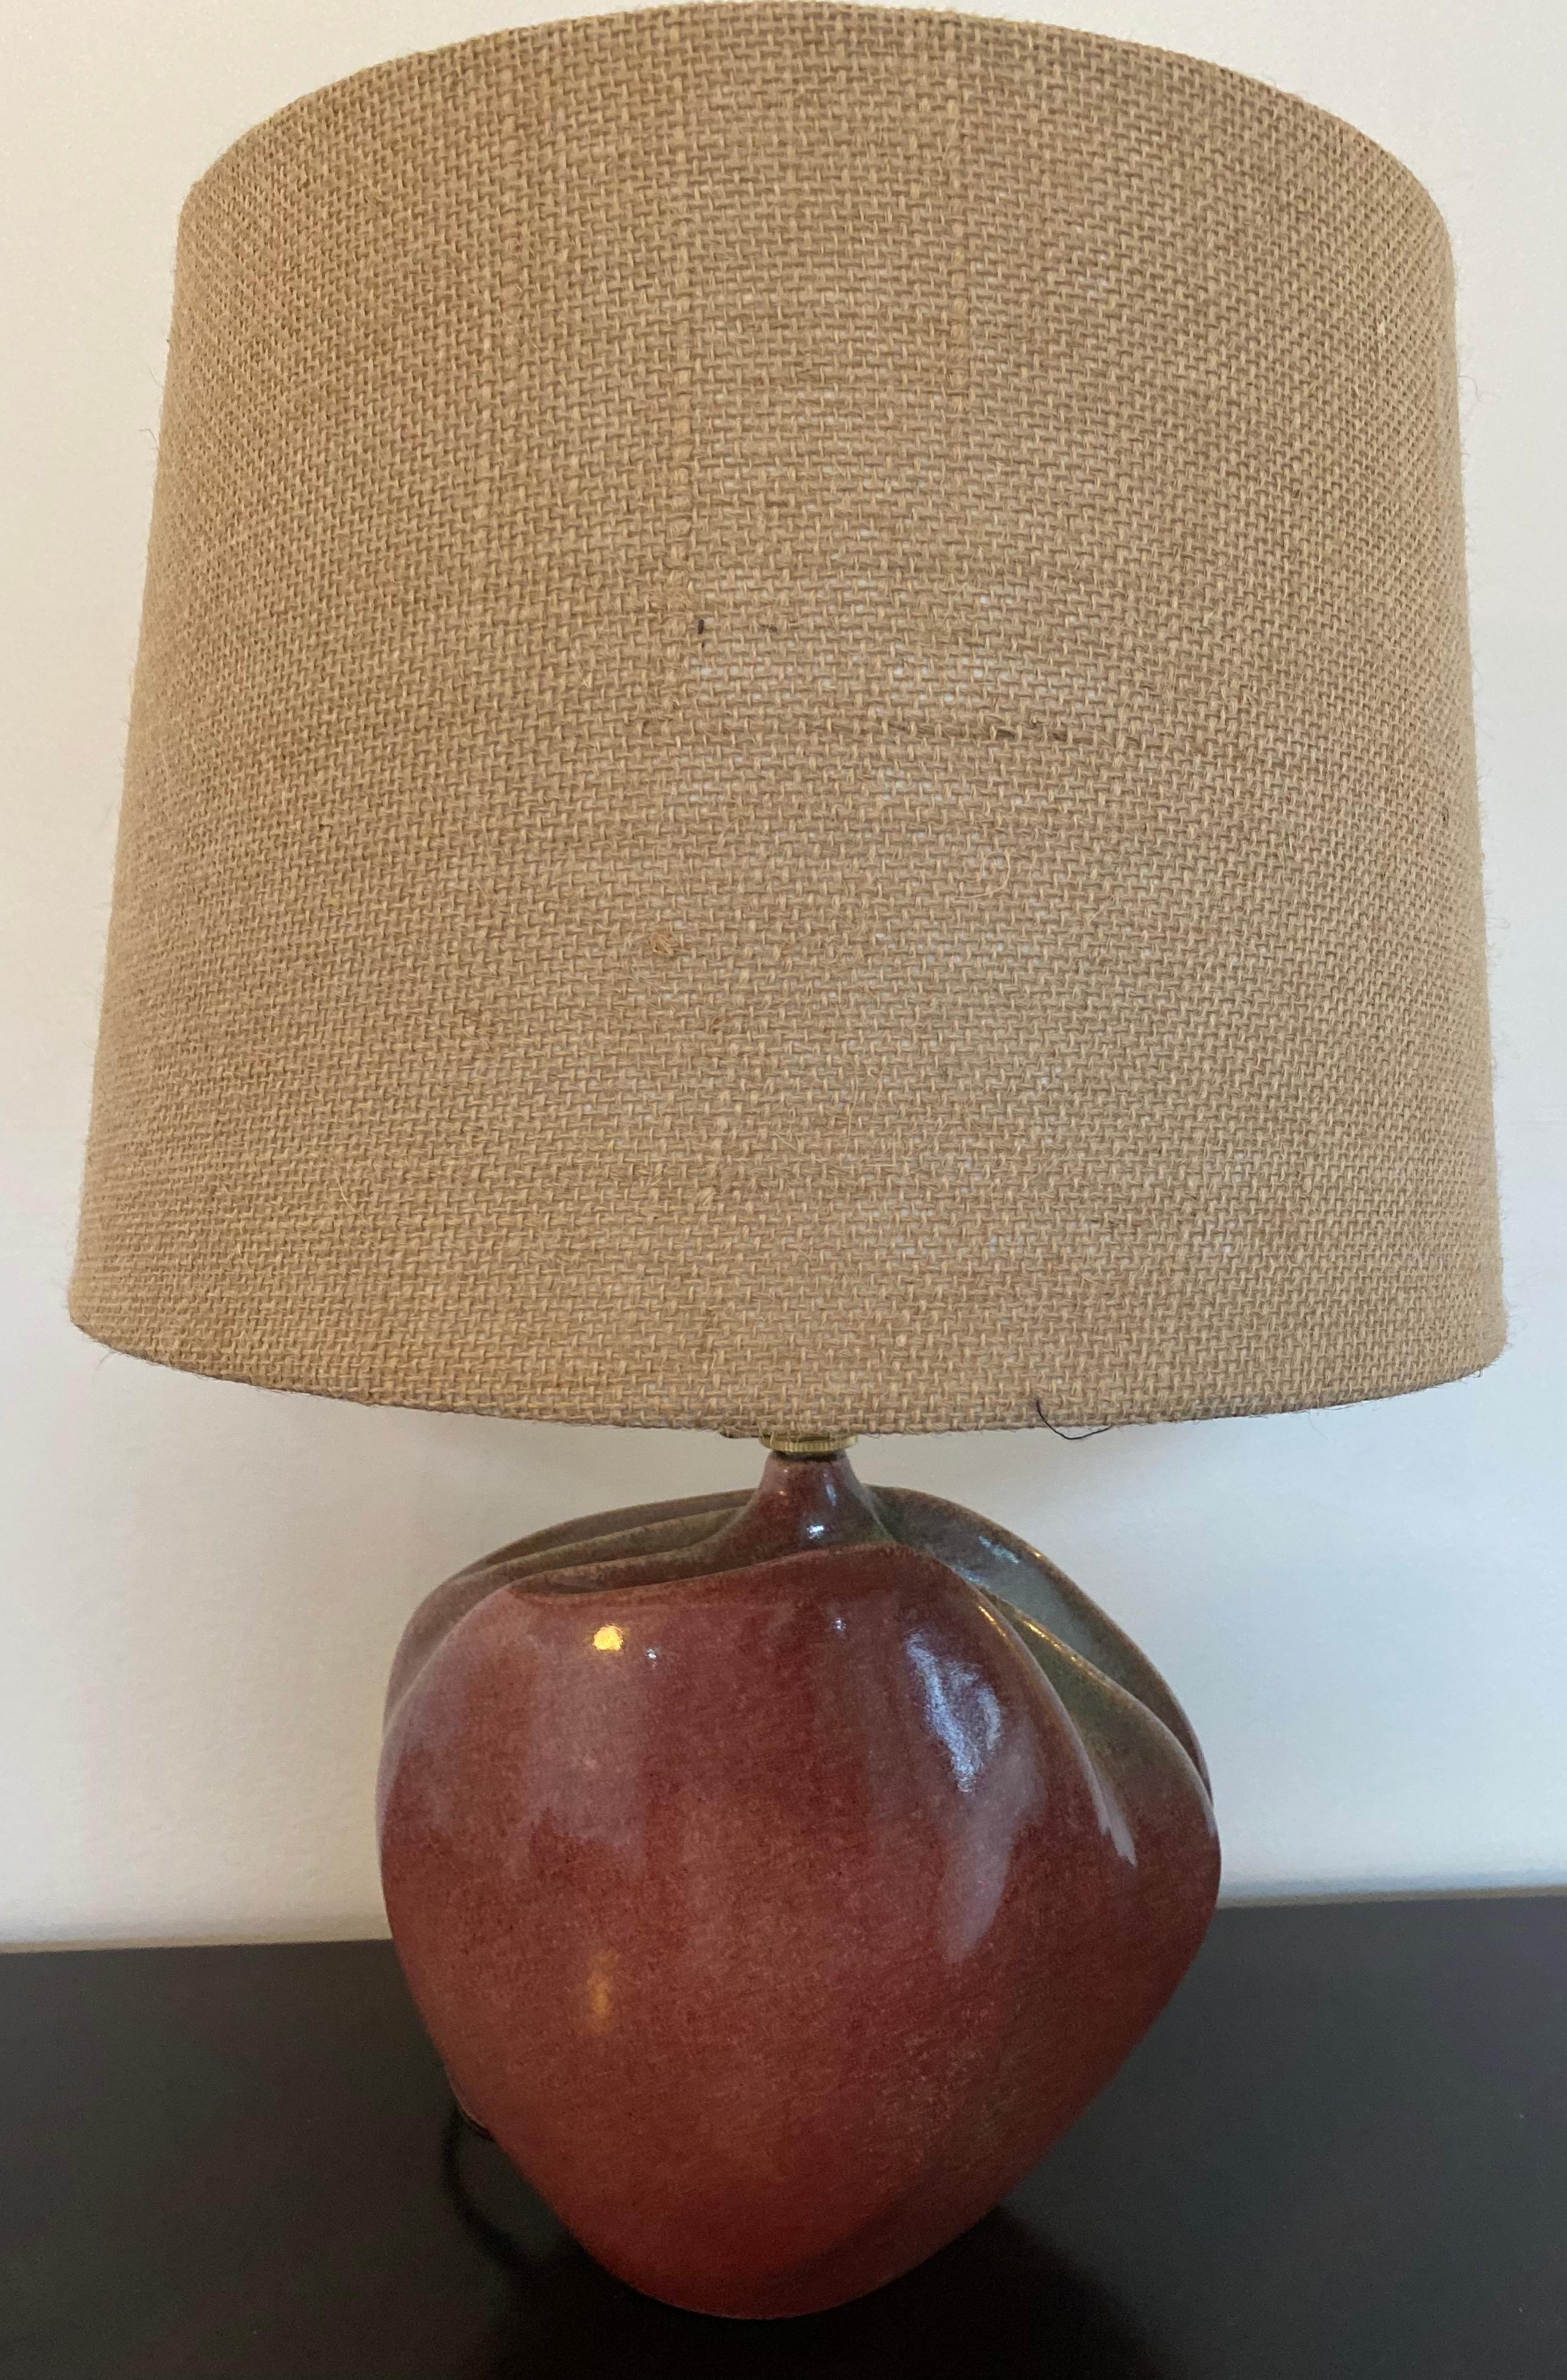 An excellent French mid century sculptural art pottery table lamp by Tim Orr.
Signed. The vase measures 8.5” H x 8.5” W x 4” D. 
Biography:
orn in England, Tim Orr is a sculptor, painter and ceramist. He moved to Biot, France in 1960 and lived